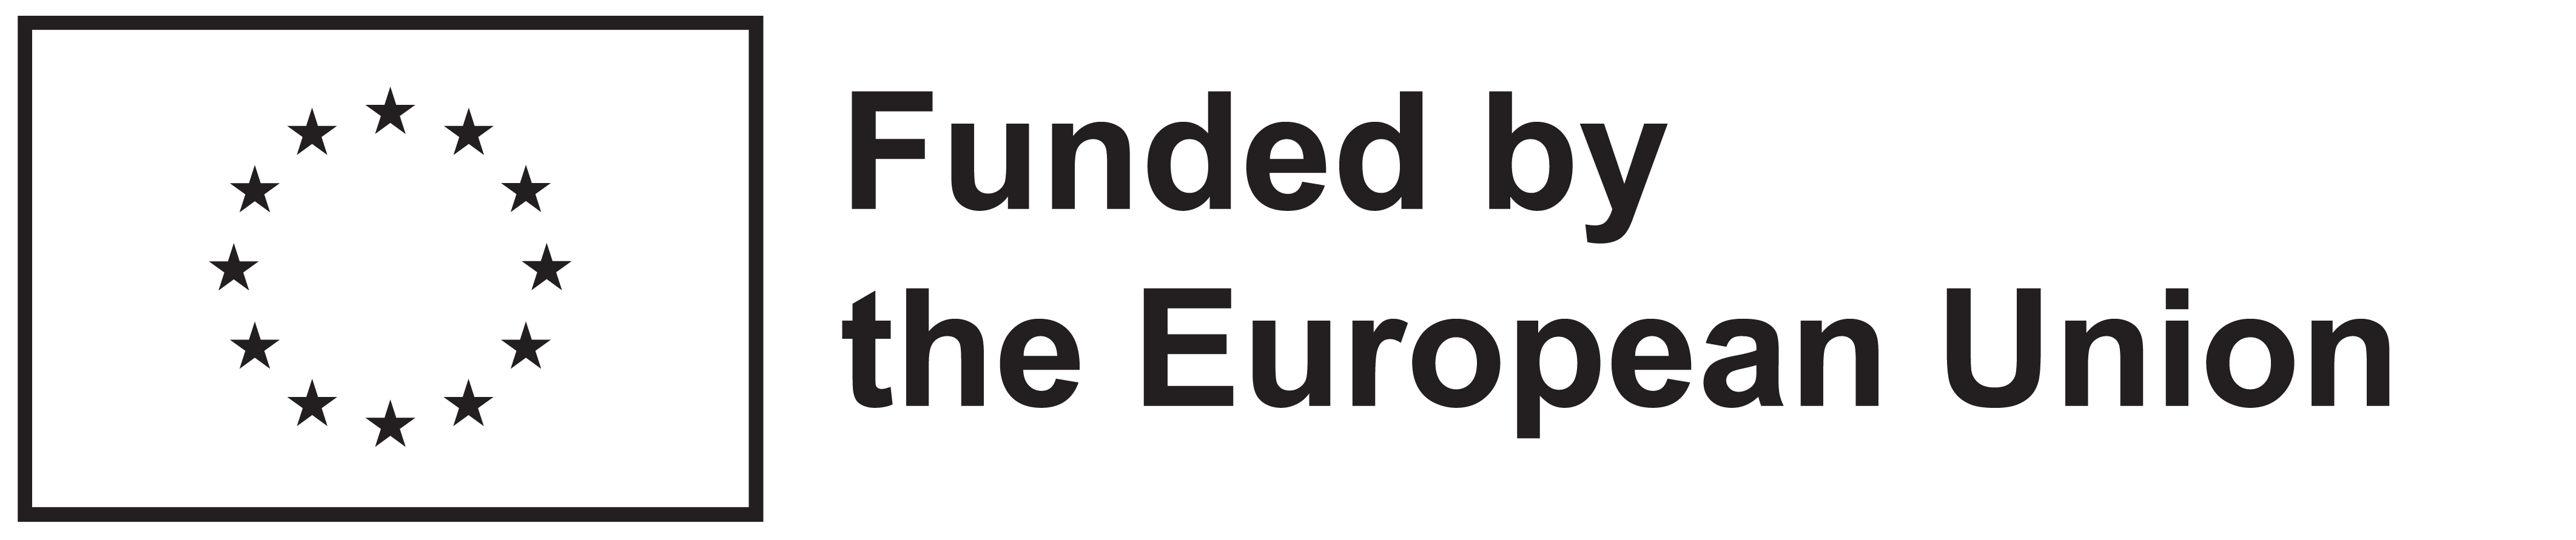 Funded by the EU logo black